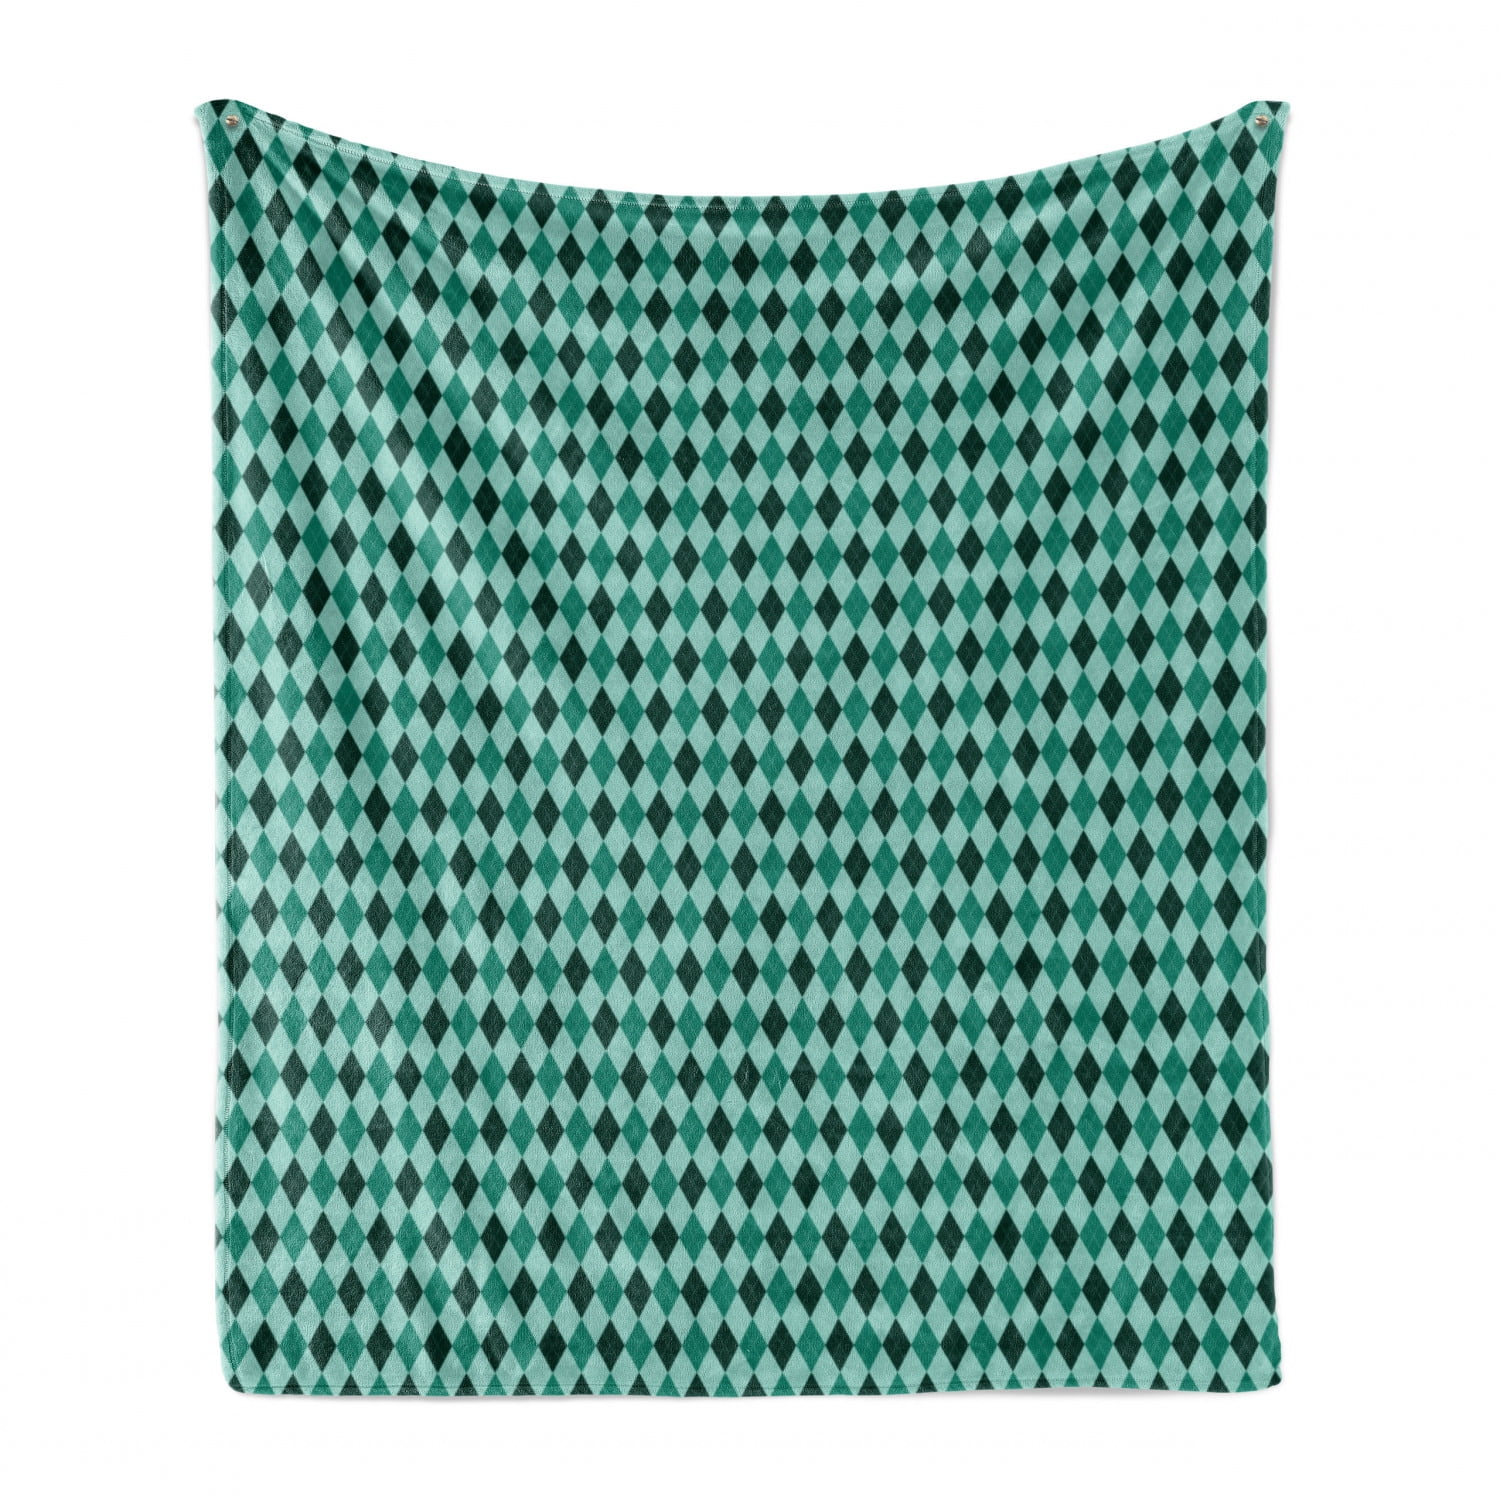 Teal Dark Reseda Green Natural Argyle Inspired Illustration in Monochrome Style 60 x 80 Cozy Plush for Indoor and Outdoor Use Ambesonne Dark Green Soft Flannel Fleece Throw Blanket 